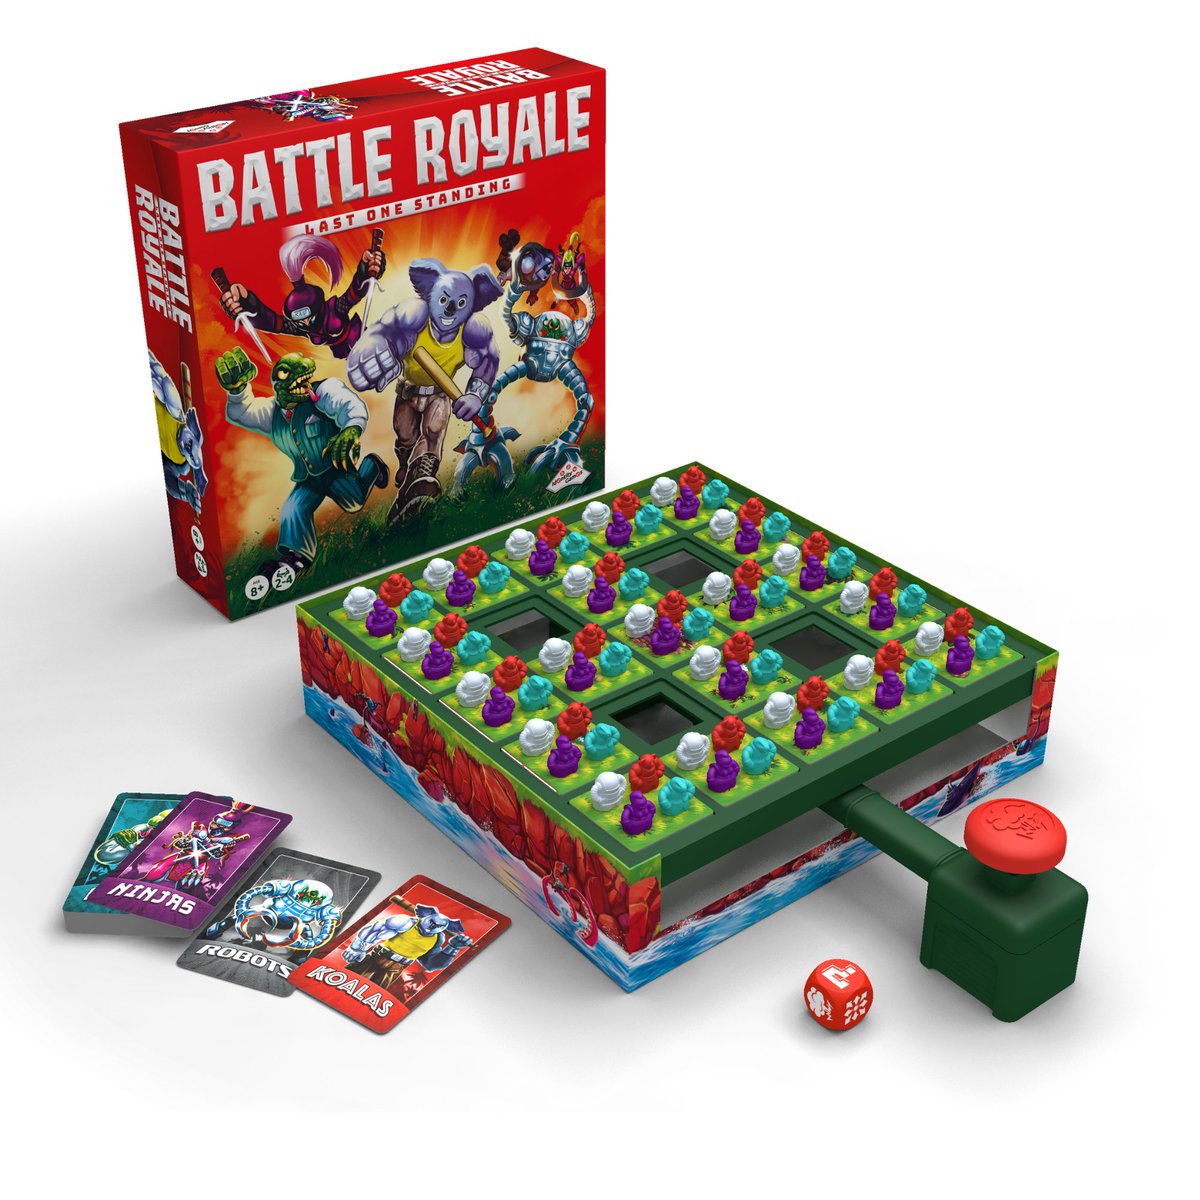 Visit TOMY at stand 2-772 and check out our amazing new strategy games: Medical Mysteries, Battle Royale, and The Ultimate Treehouse Deluxe!